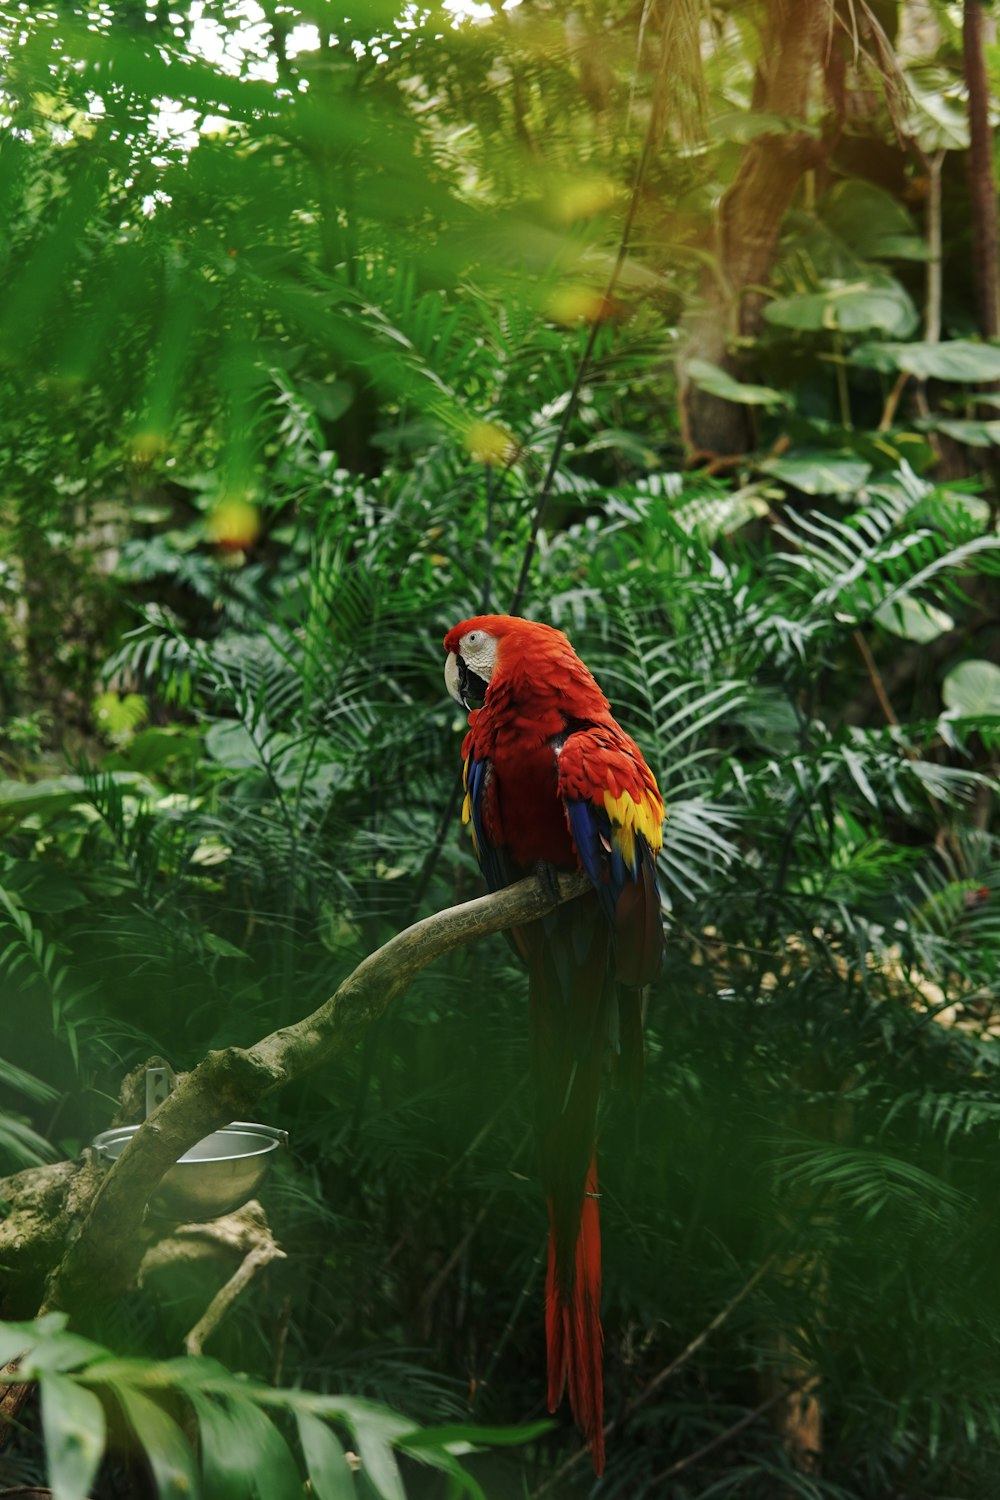 a red parrot sitting on top of a tree branch